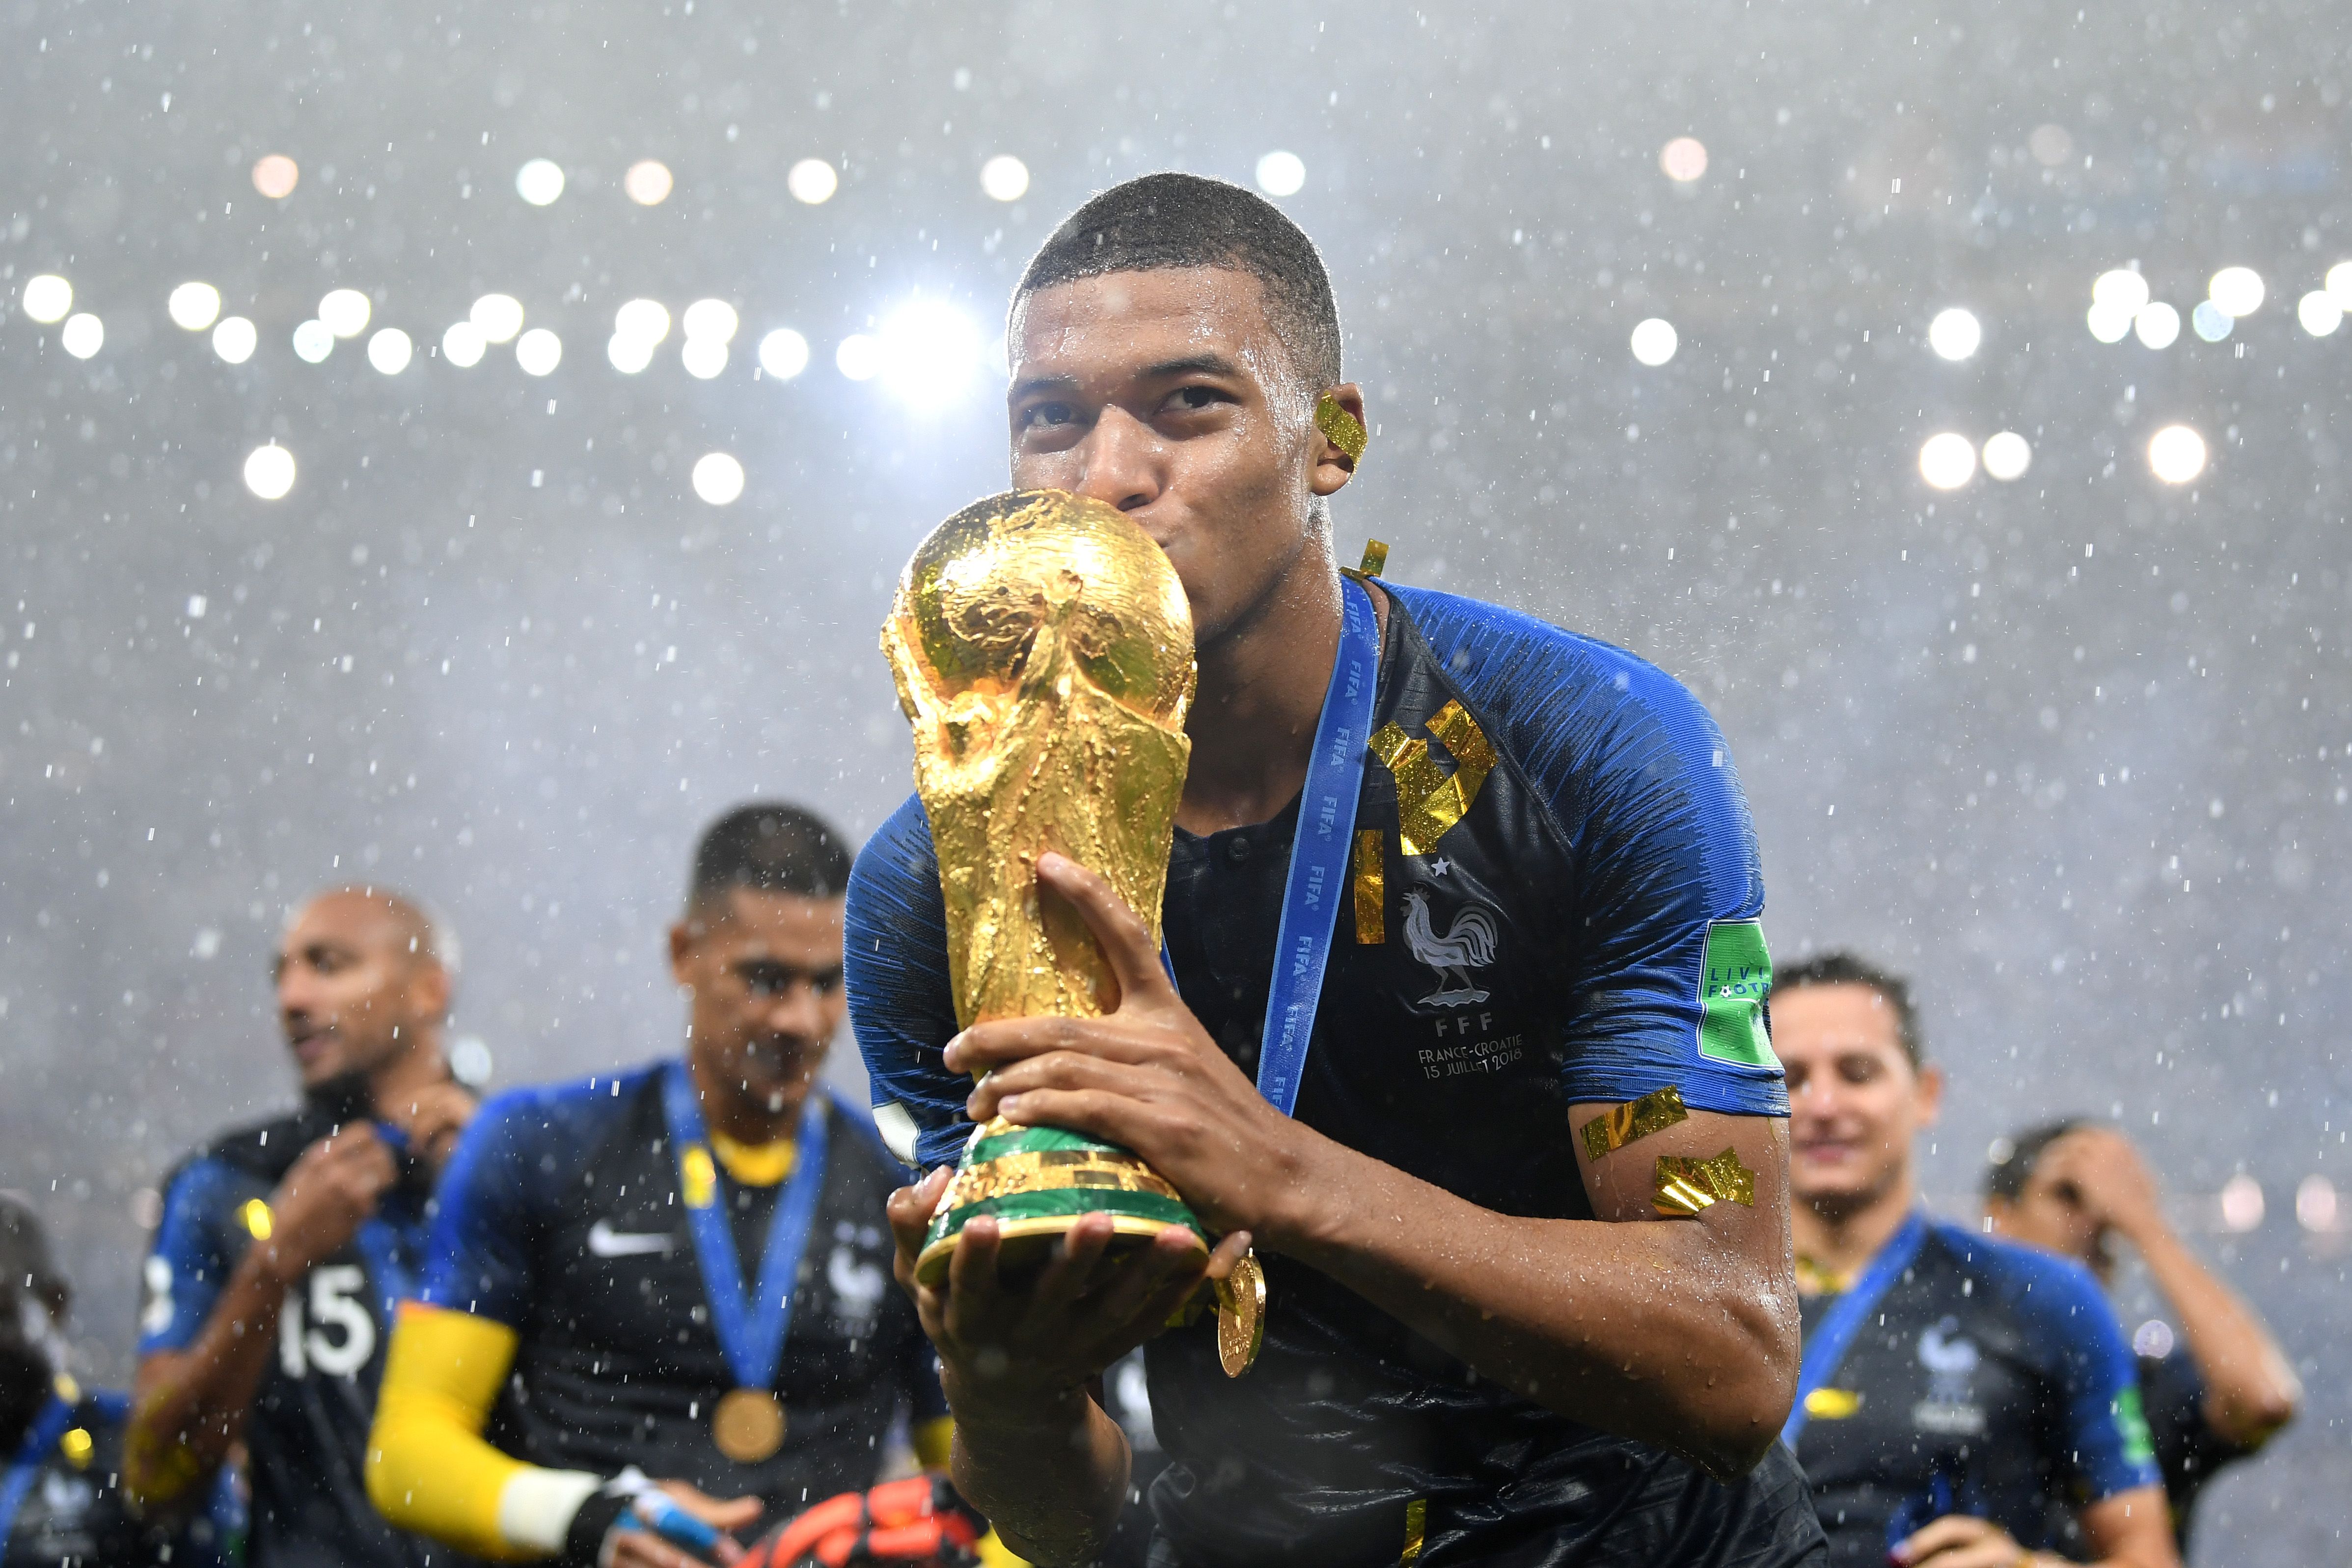 Muslim players help French national football team win FIFA 2018